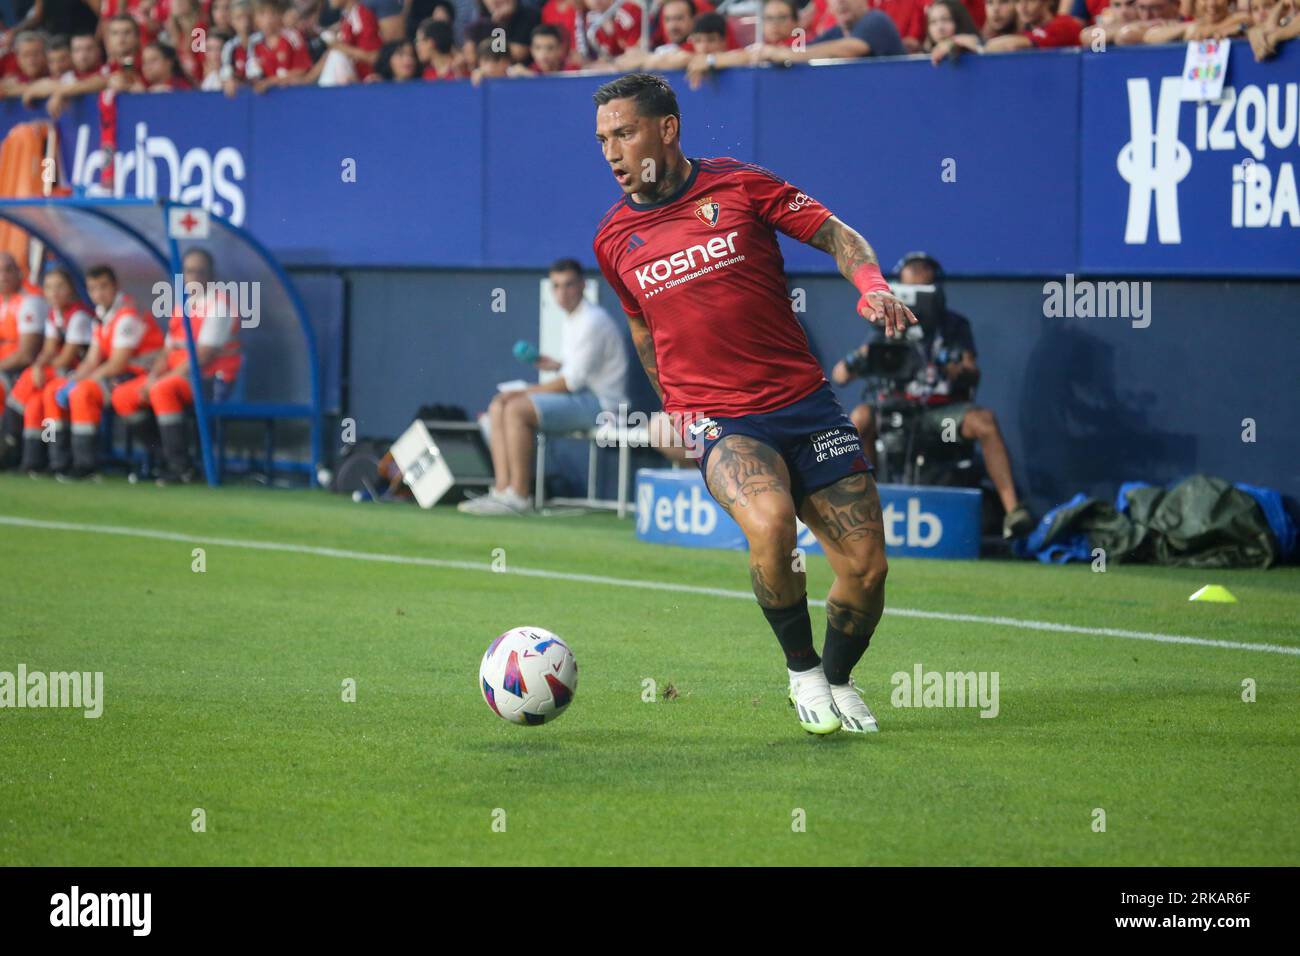 Pamplona, Spain, 24th August, 2023: CA Osasuna's player Ezequiel Avila (9) controls the ball during the first leg match of the 2023-24 UEFA Europa Conference League Preliminary Round between CA Osasuna and Club Brugge at Estadio de El Sadar, in Pamplona, on August 24, 2023. Credit: Alberto Brevers / Alamy Live News. Stock Photo